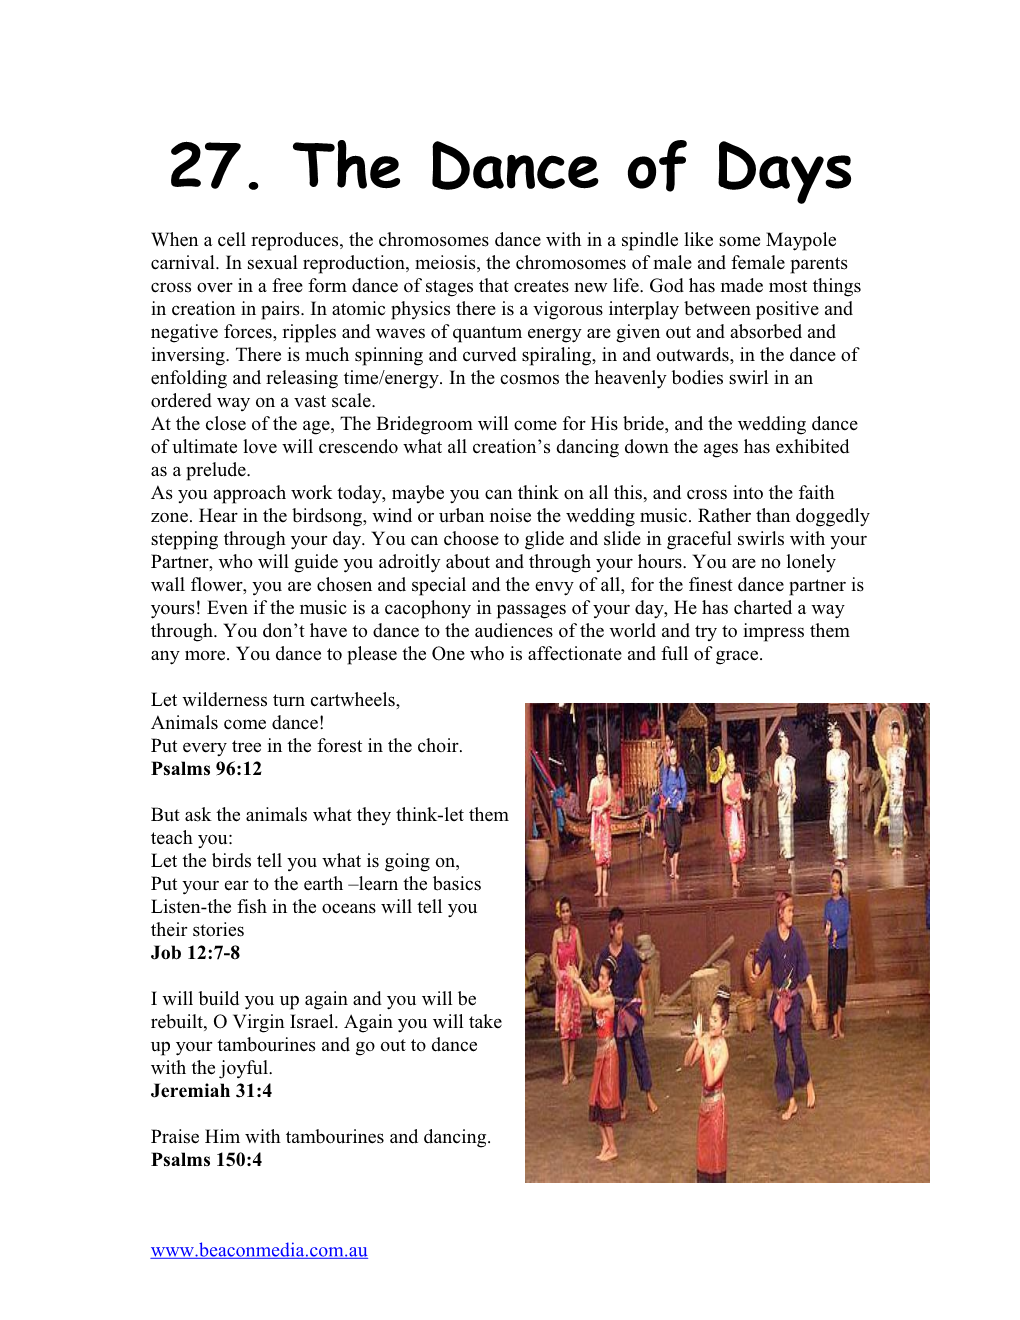 27. the Dance of Days